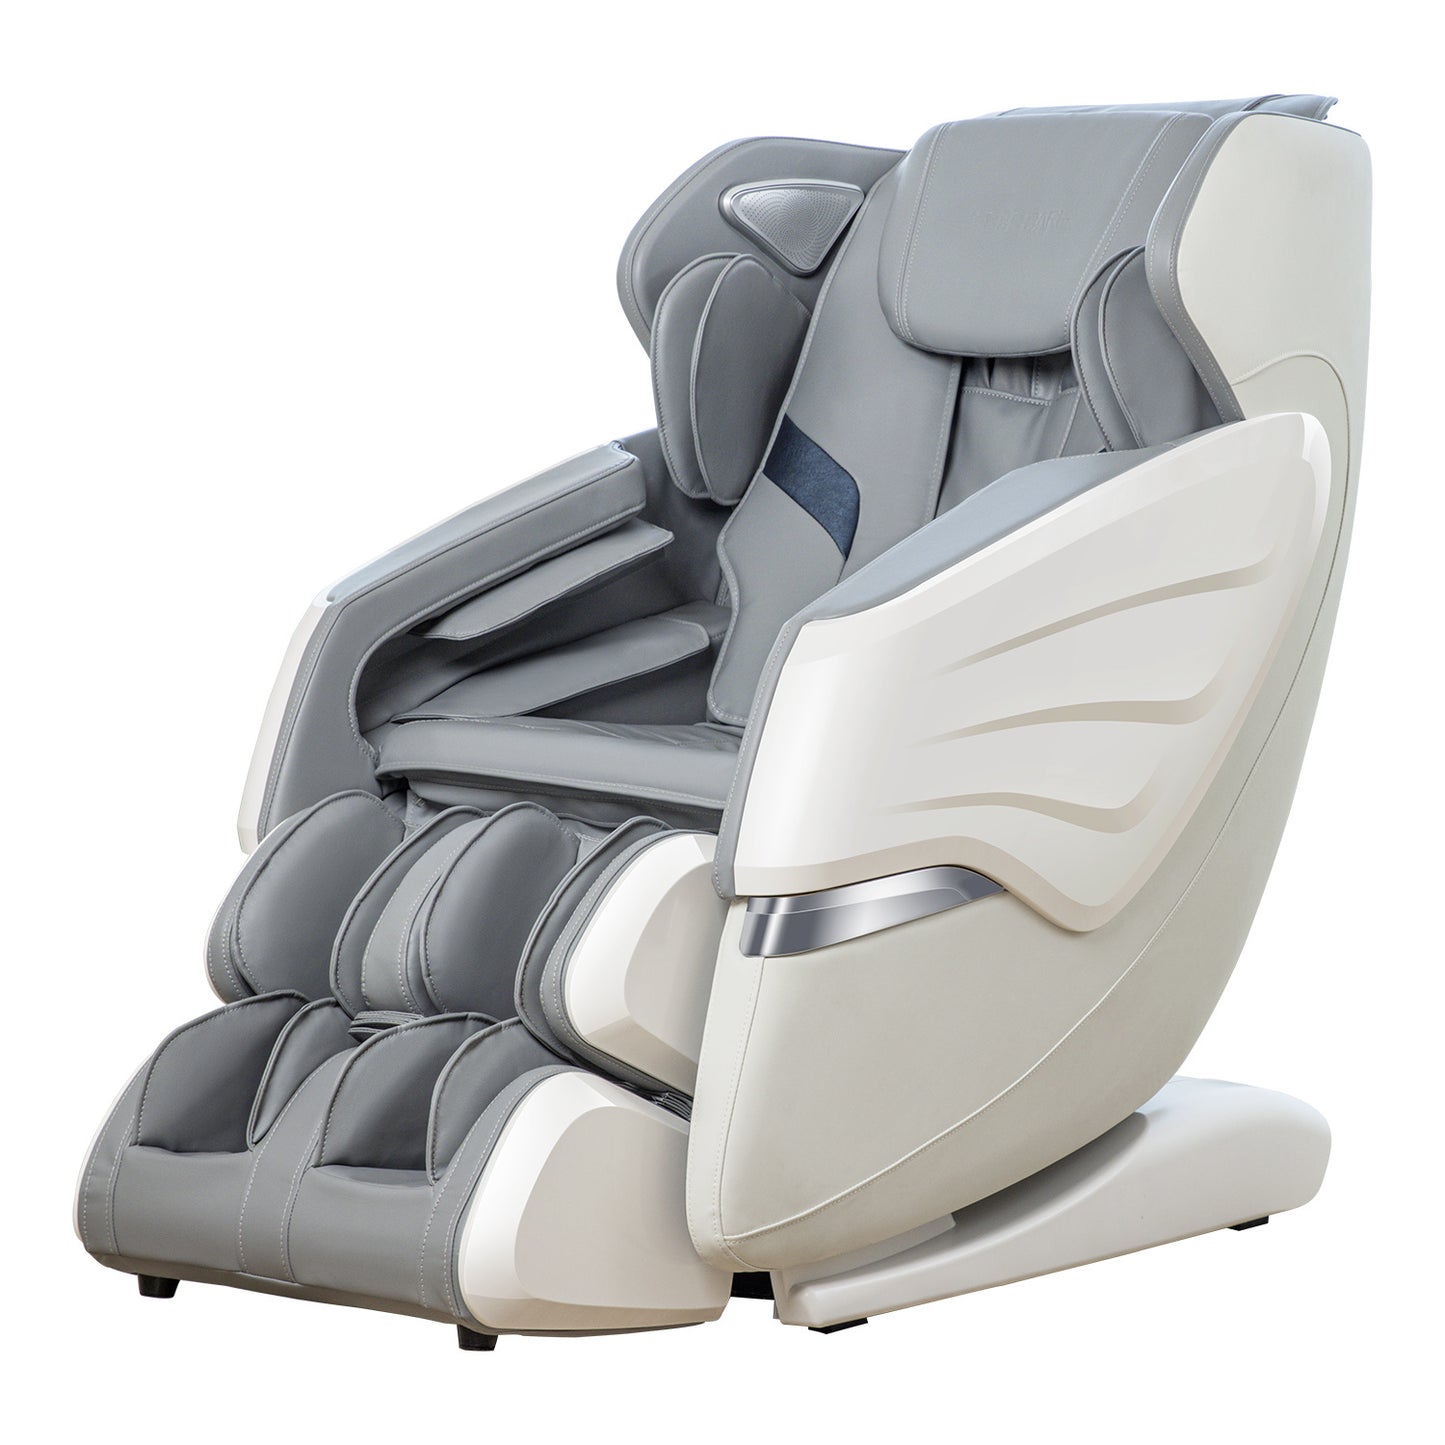 Voice Activated Full Body Massage Chair with Zero Gravity and Heating Wraps by Bosscare